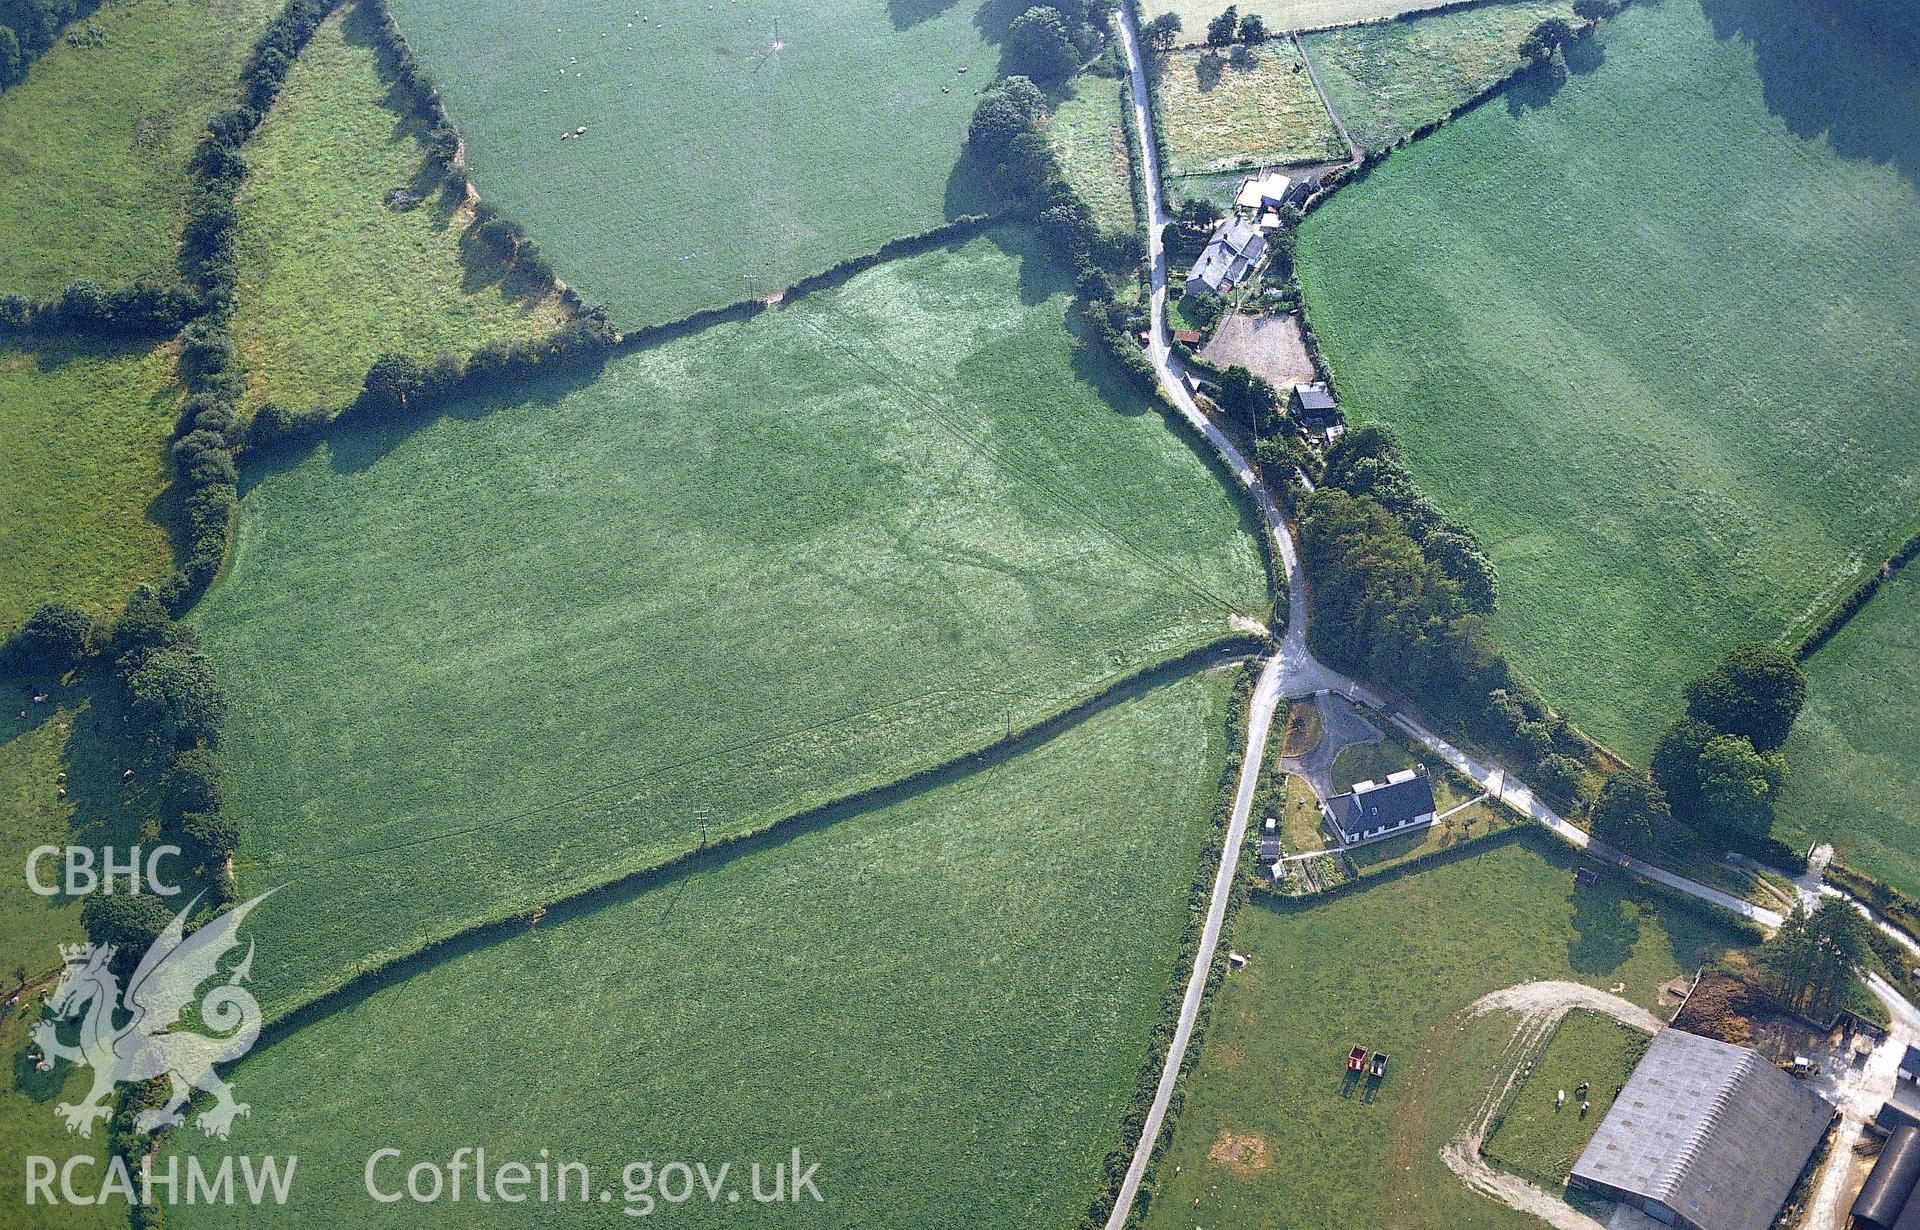 Slide of RCAHMW colour oblique aerial photograph showing Cyncoed, Melindwr cropmarks, taken by Chris Musson, 1990.